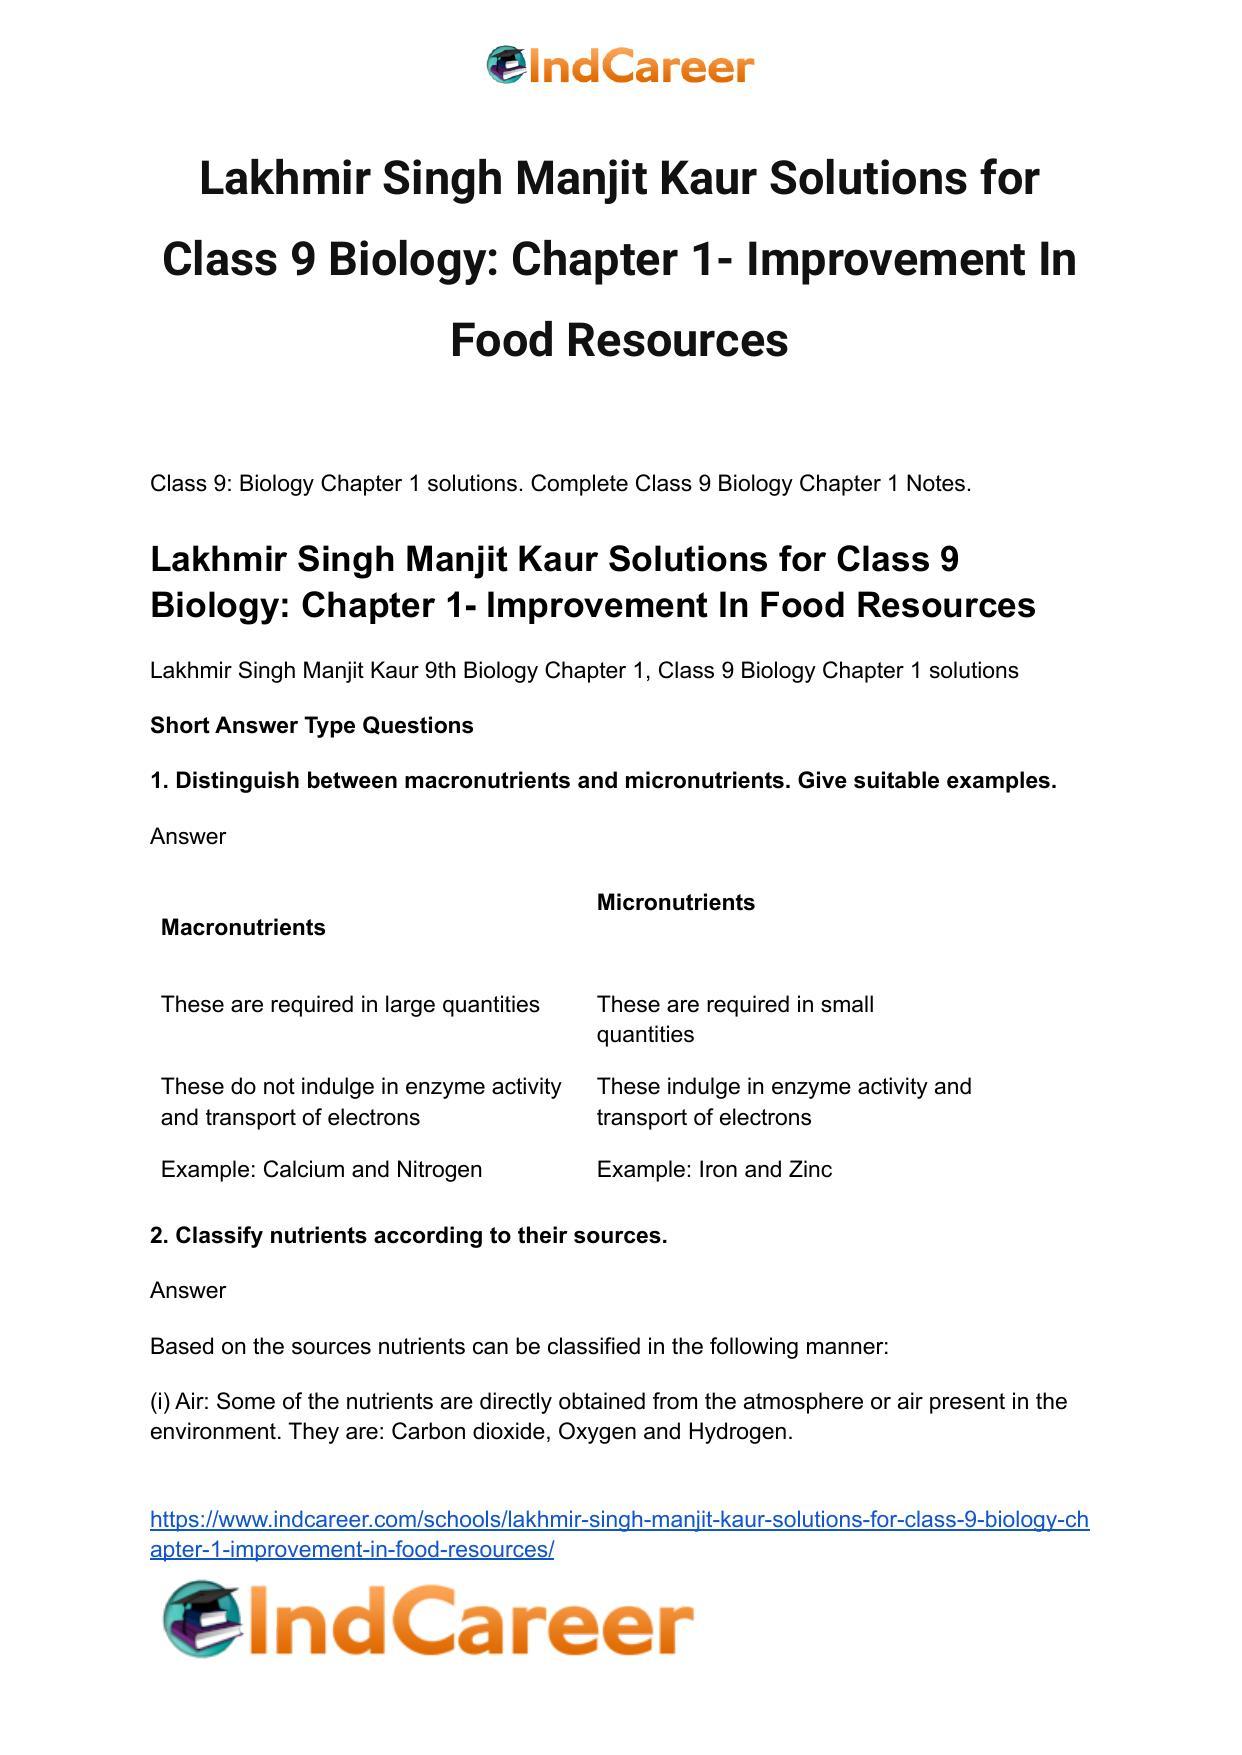 Lakhmir Singh Manjit Kaur  Solutions for Class 9 Biology: Chapter 1- Improvement In Food Resources - Page 2